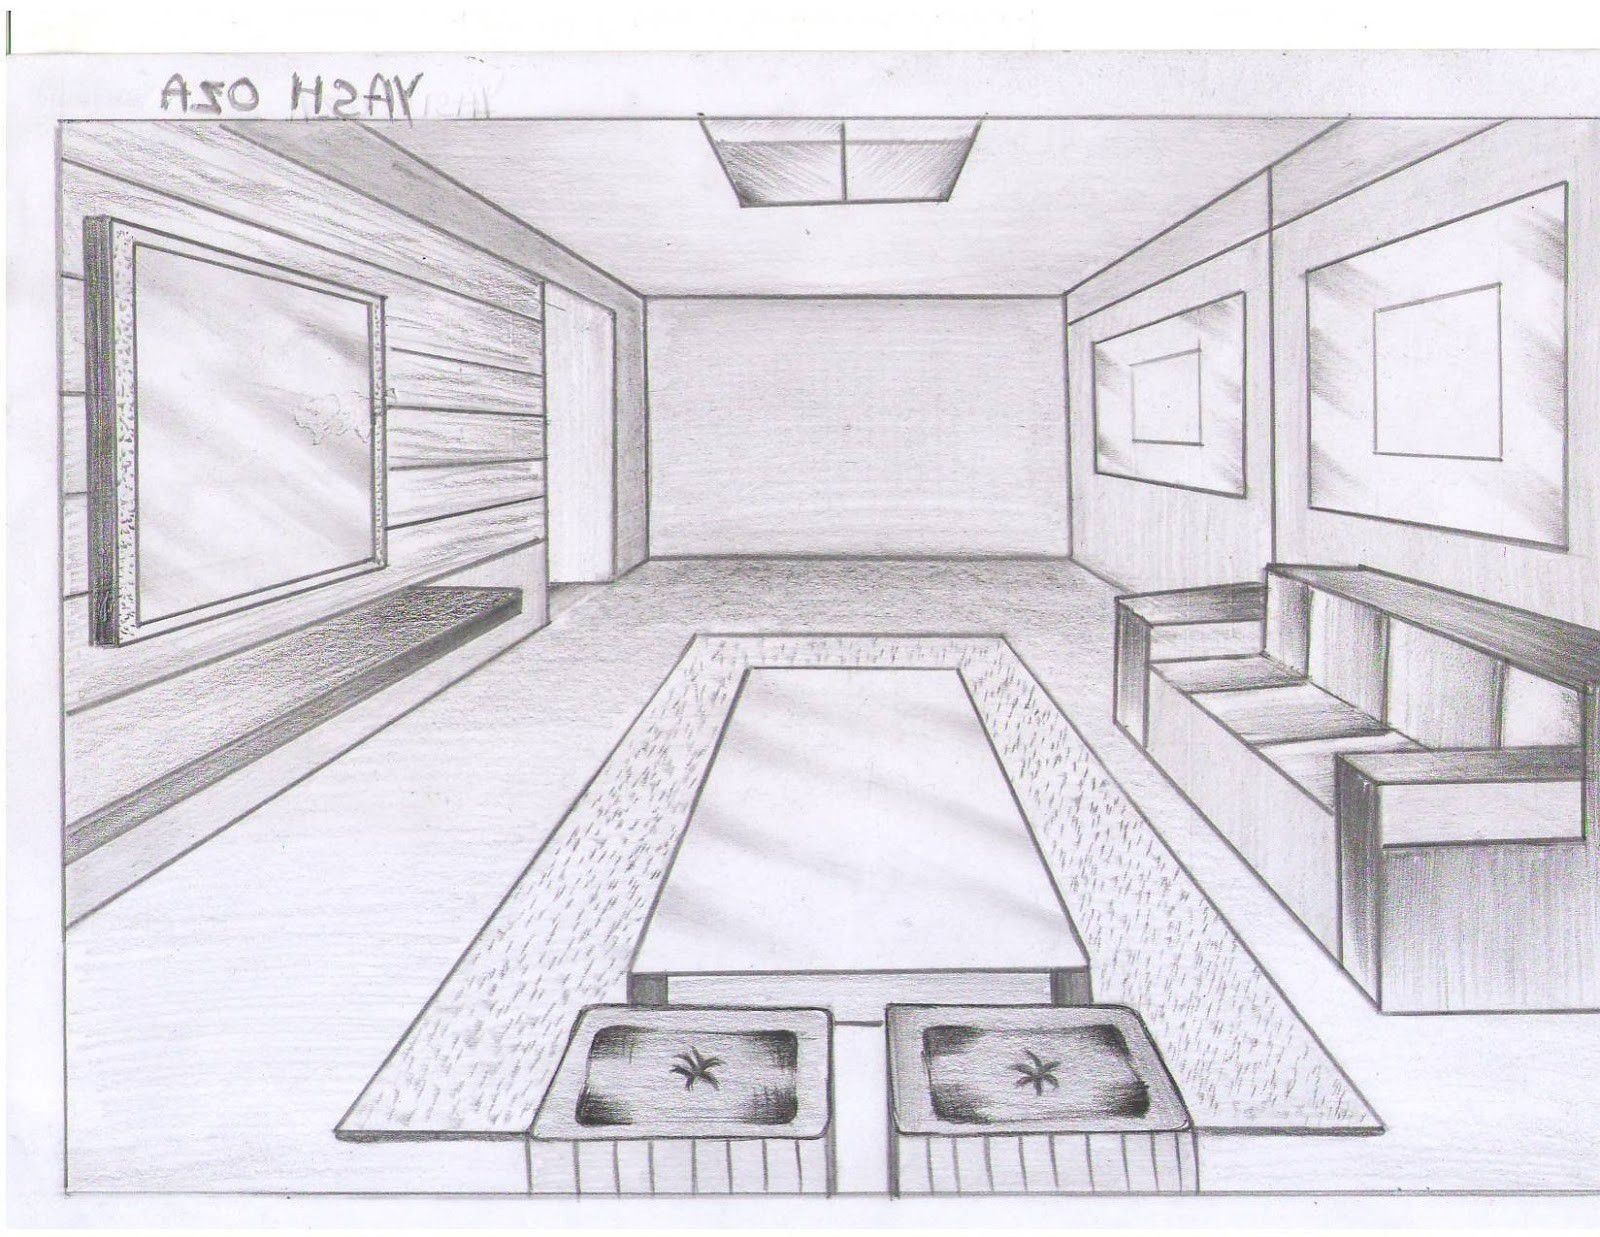 One Point Perspective Room Sketch At Paintingvalley Com